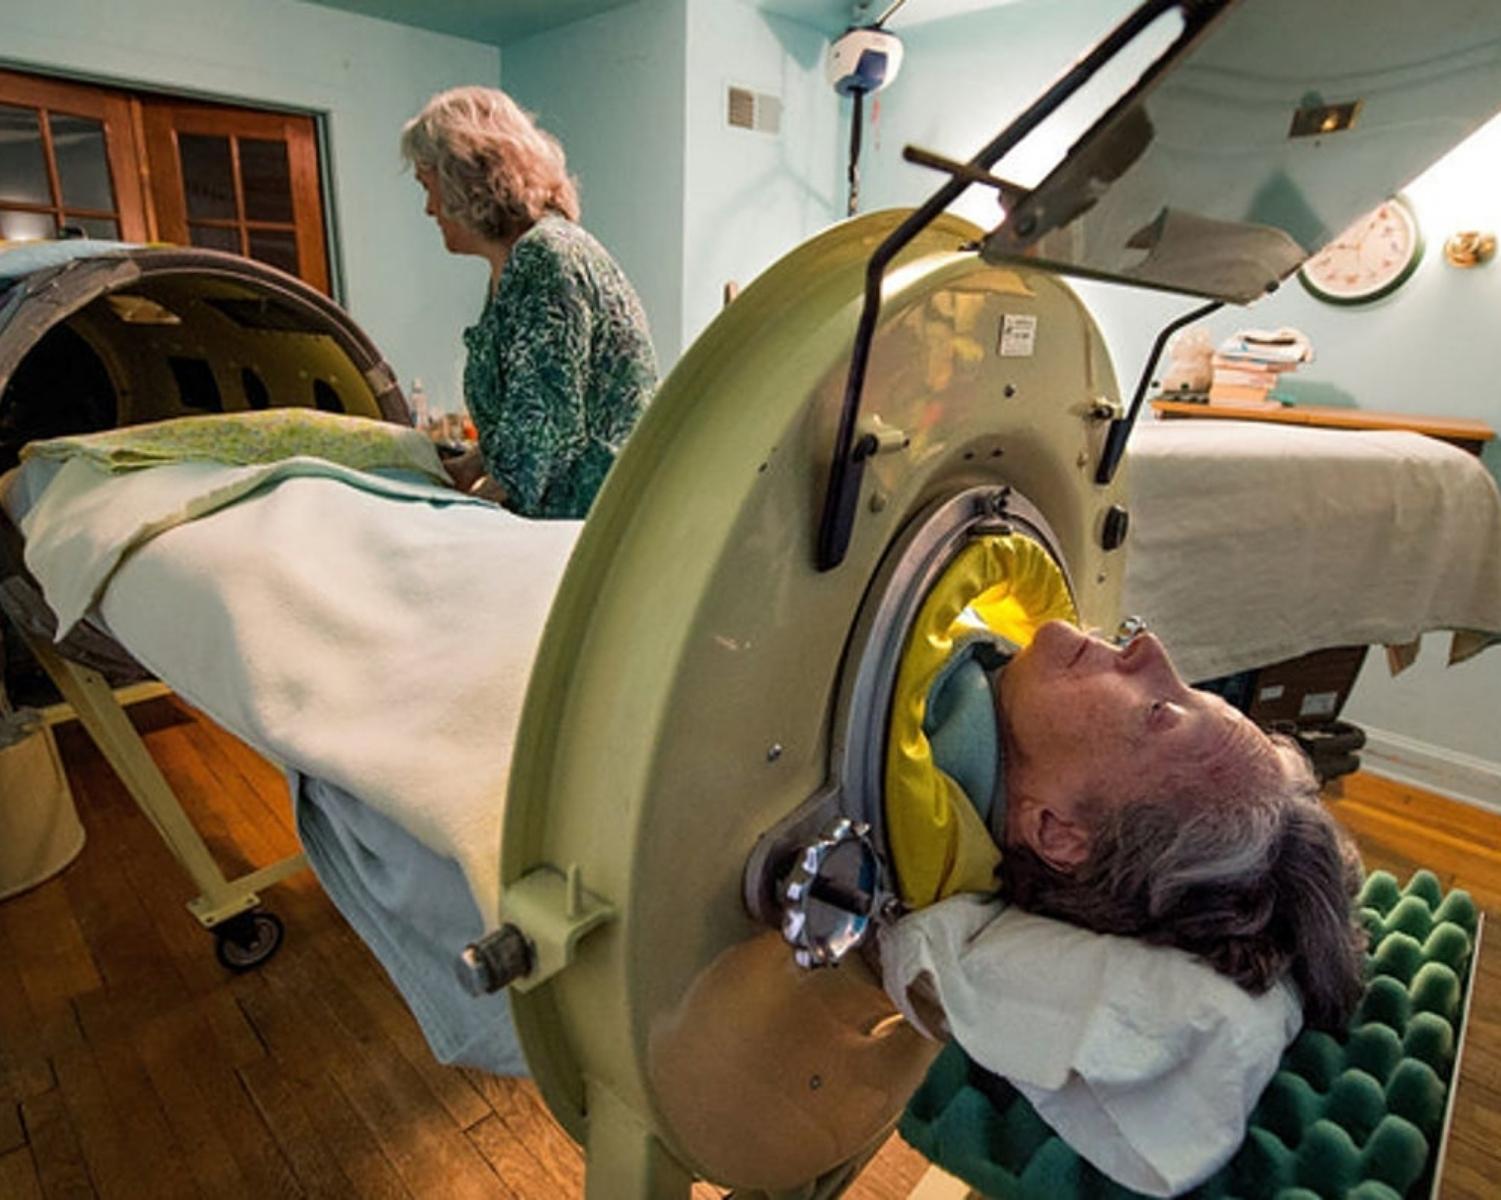 What's An Iron Lung?